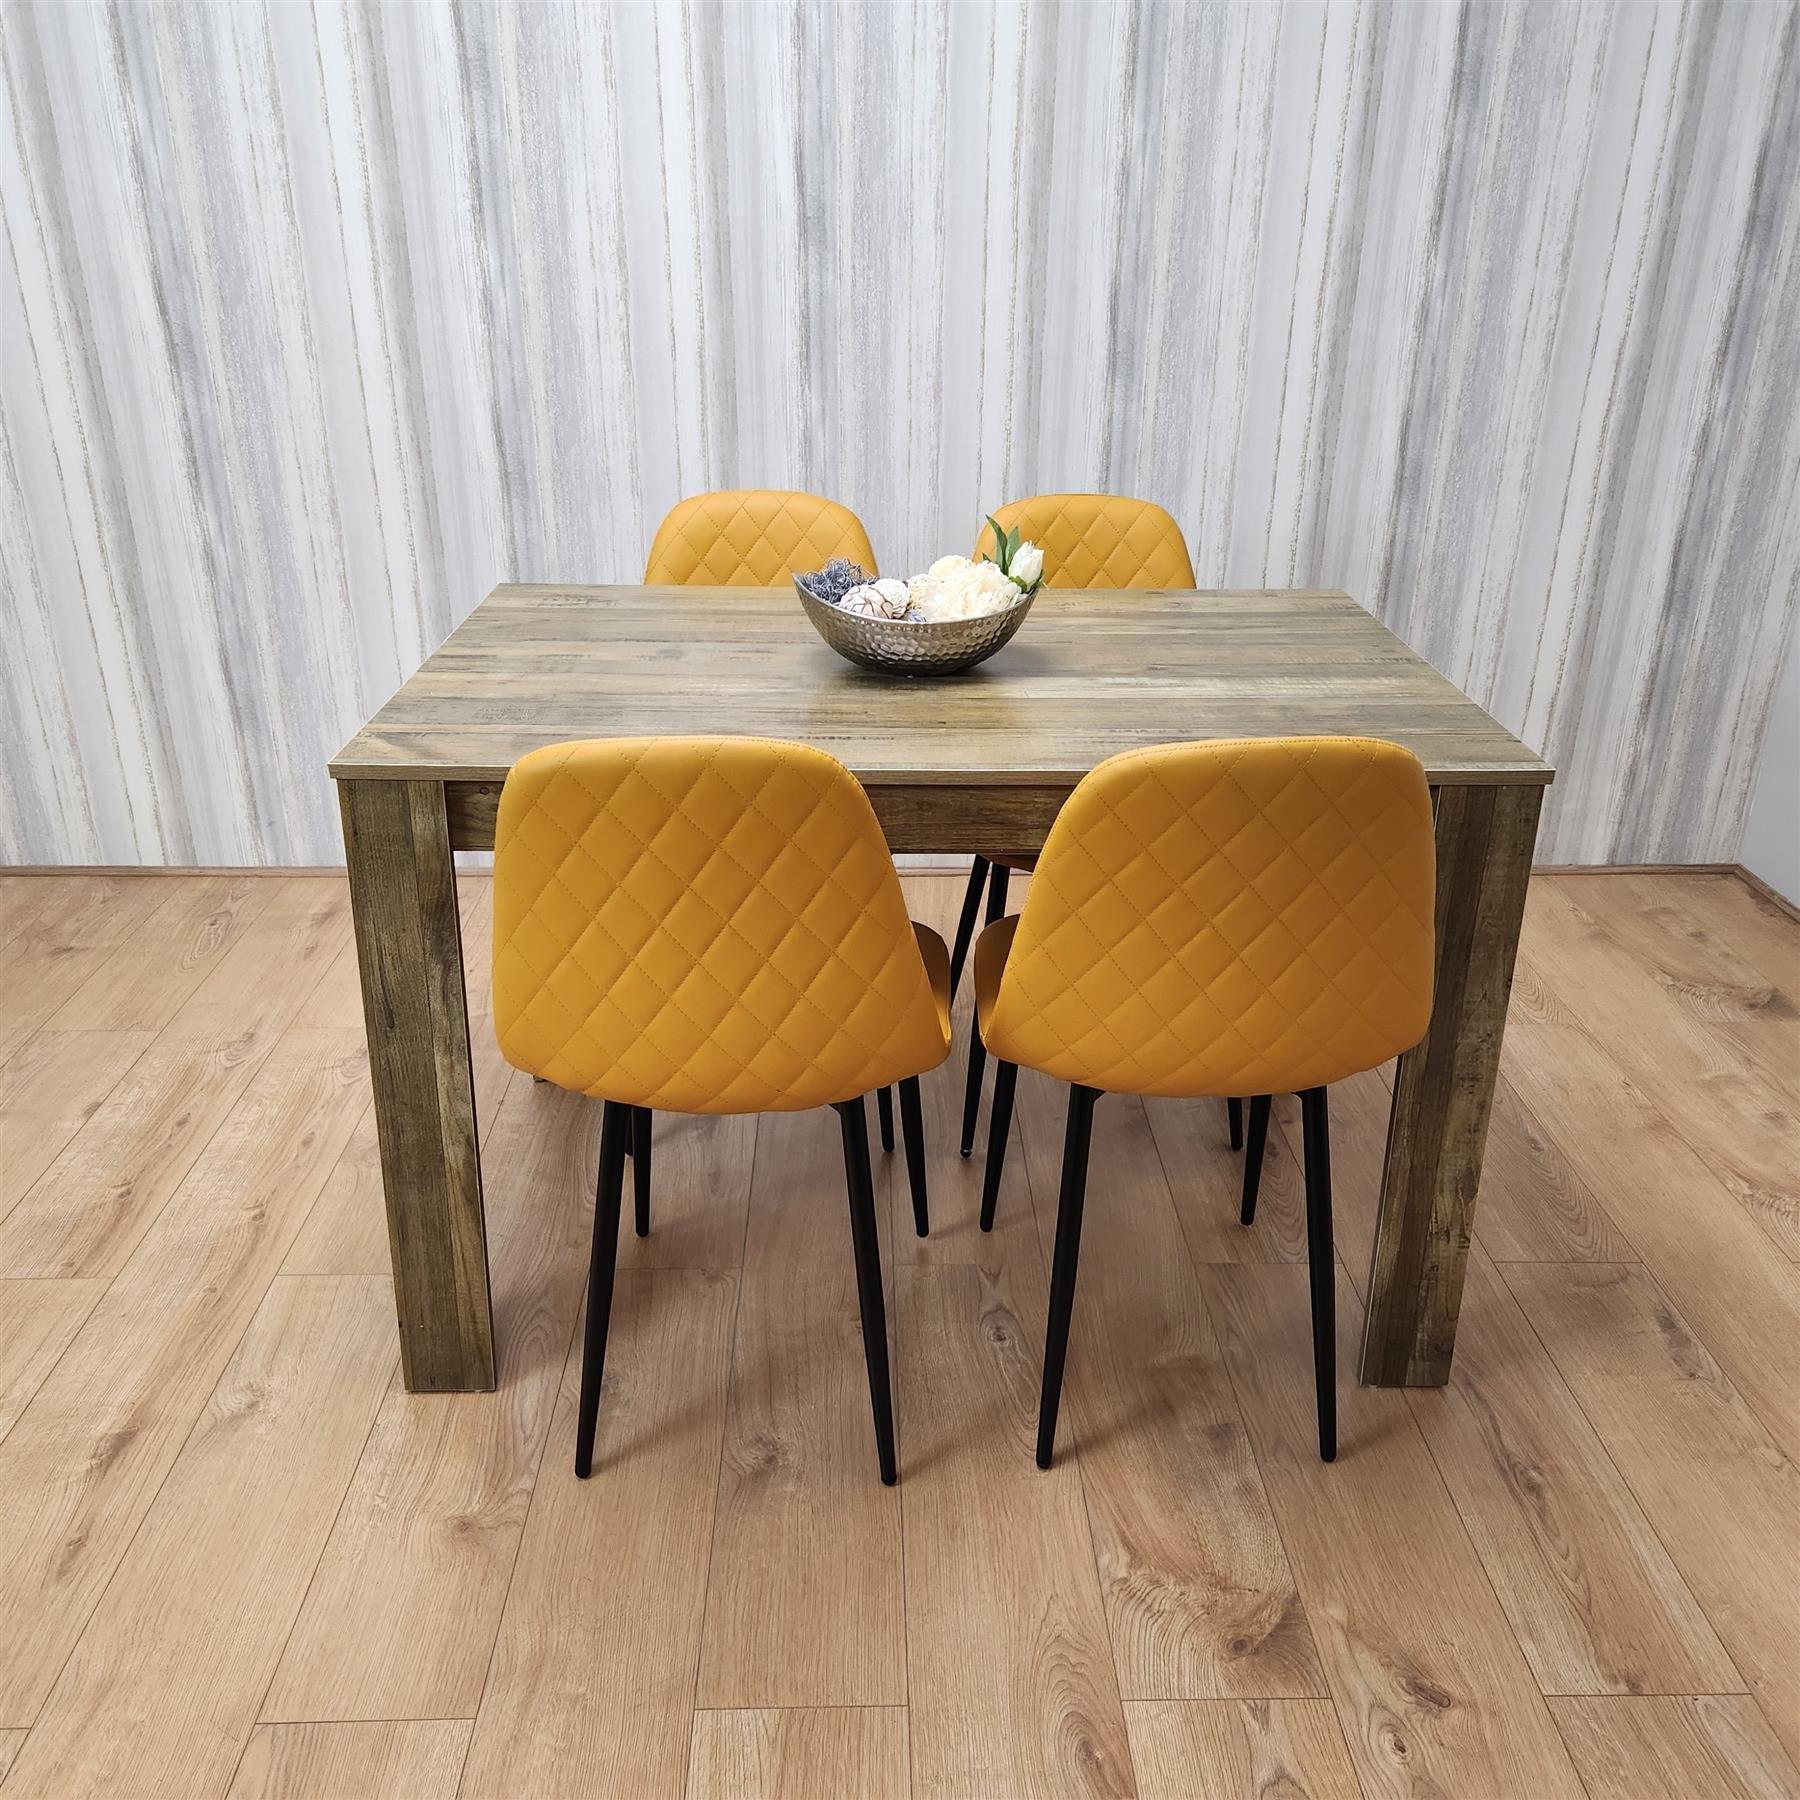 Dining Table and 4 Chairs Rustic Effect Table with 4 Mustard Gem Patterned Chairs